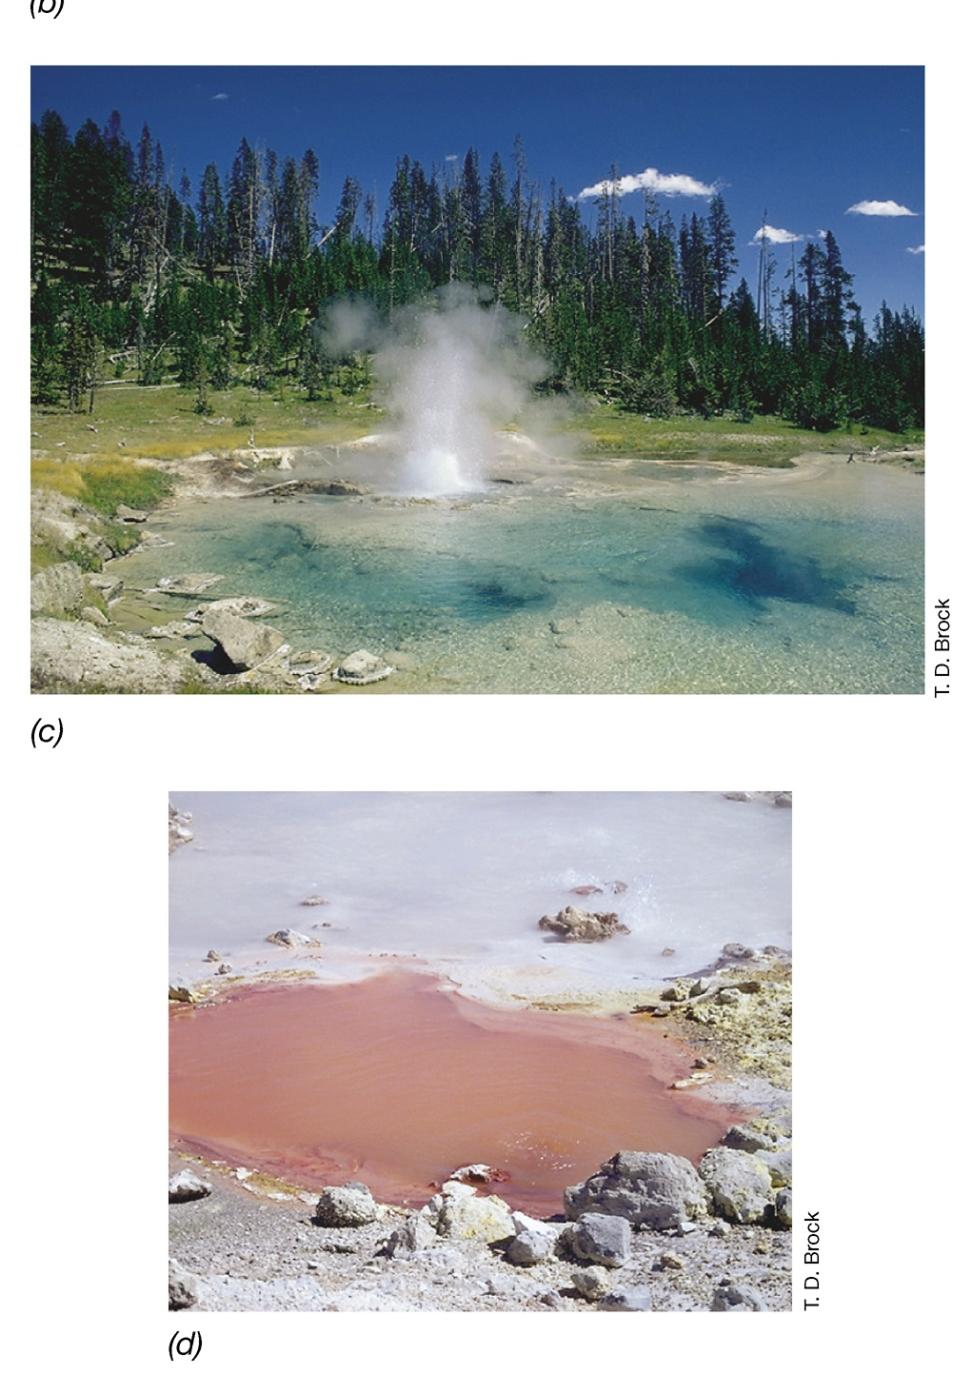 Habitats of hyperthermophilic Crenarchaeotes A typical boiling spring